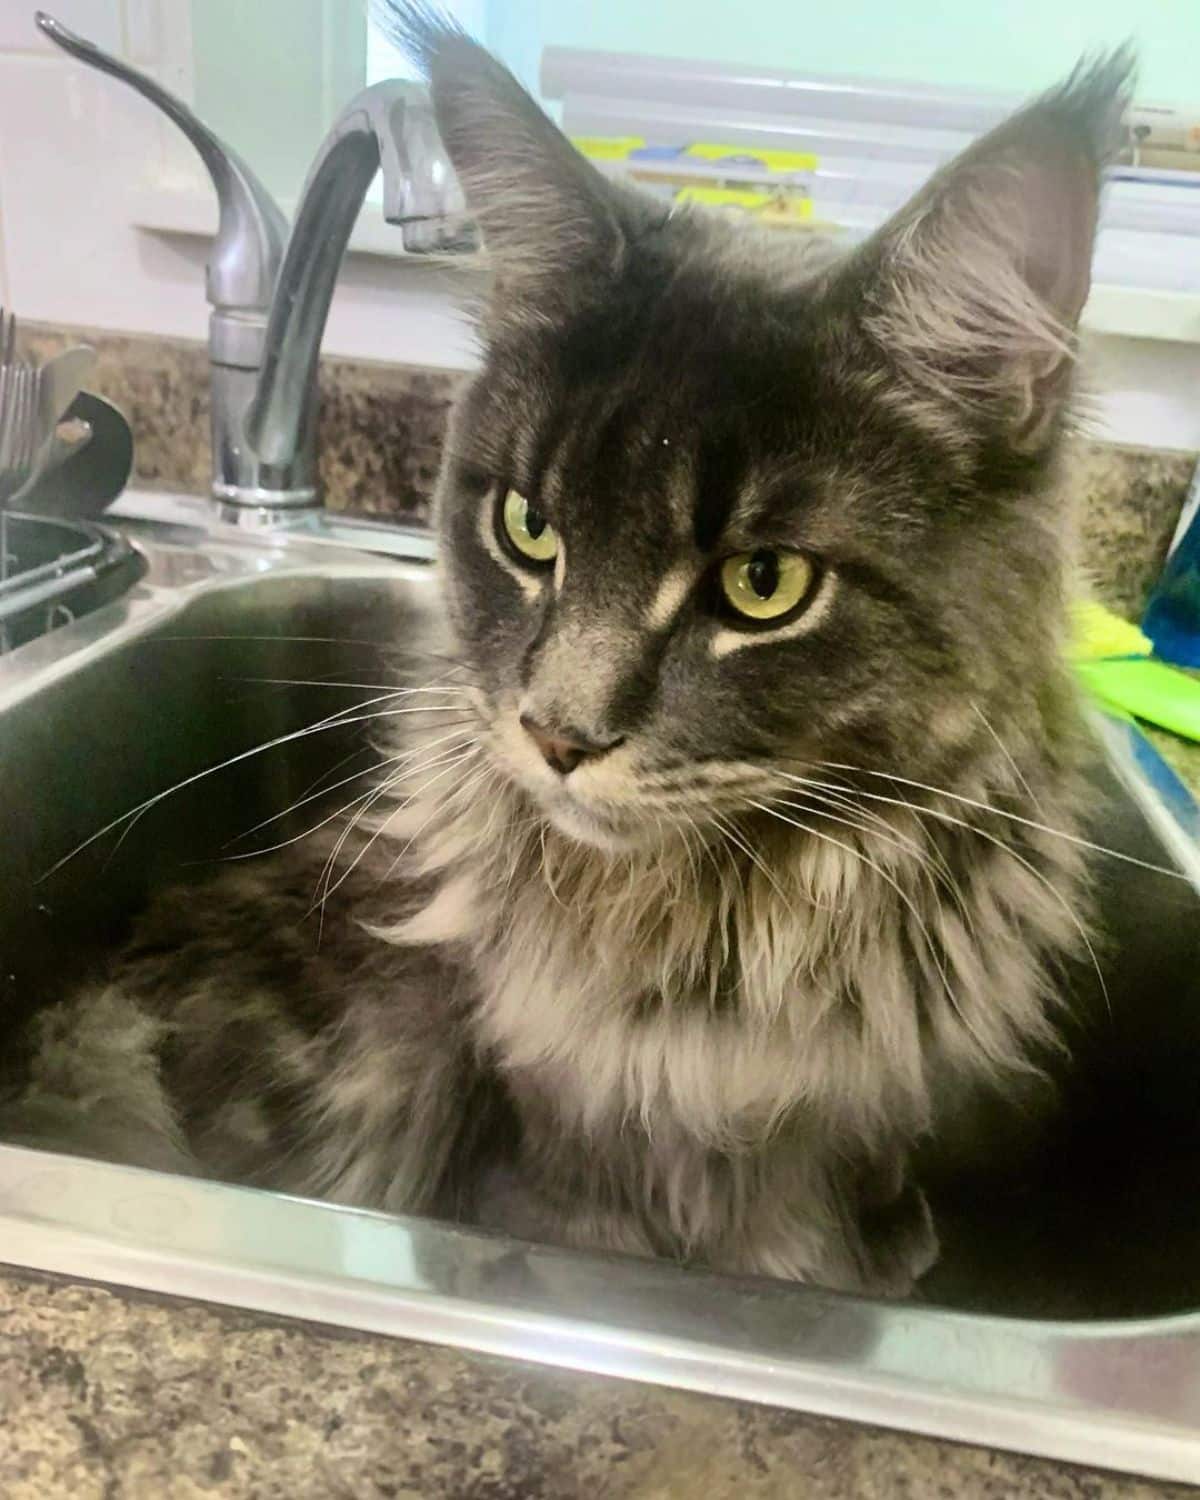 A fluffy tabby maine coon lying in a sink.